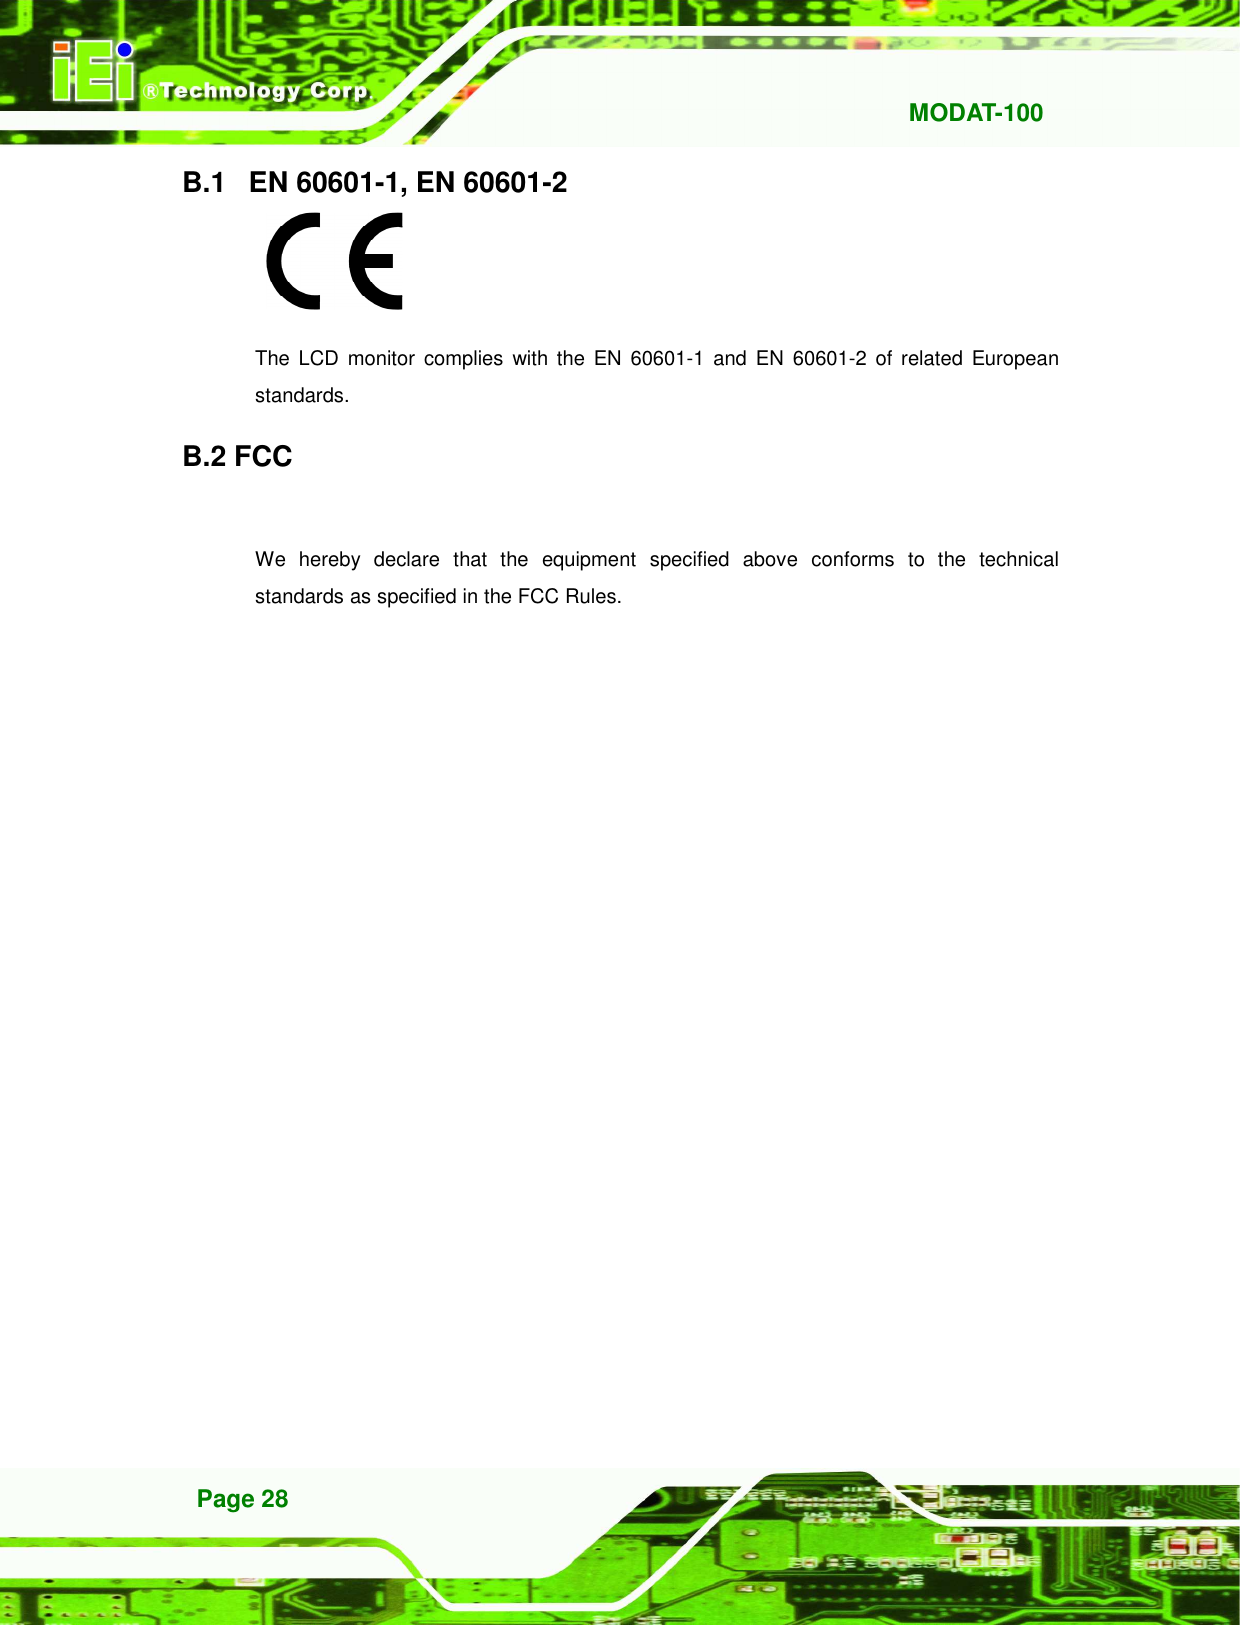   MODAT-100 Page 28 B.1   EN 60601-1, EN 60601-2    The LCD  monitor  complies  with  the  EN  60601-1  and  EN  60601-2  of  related  European standards. B.2 FCC  We  hereby  declare  that  the  equipment  specified  above  conforms  to  the  technical standards as specified in the FCC Rules. 